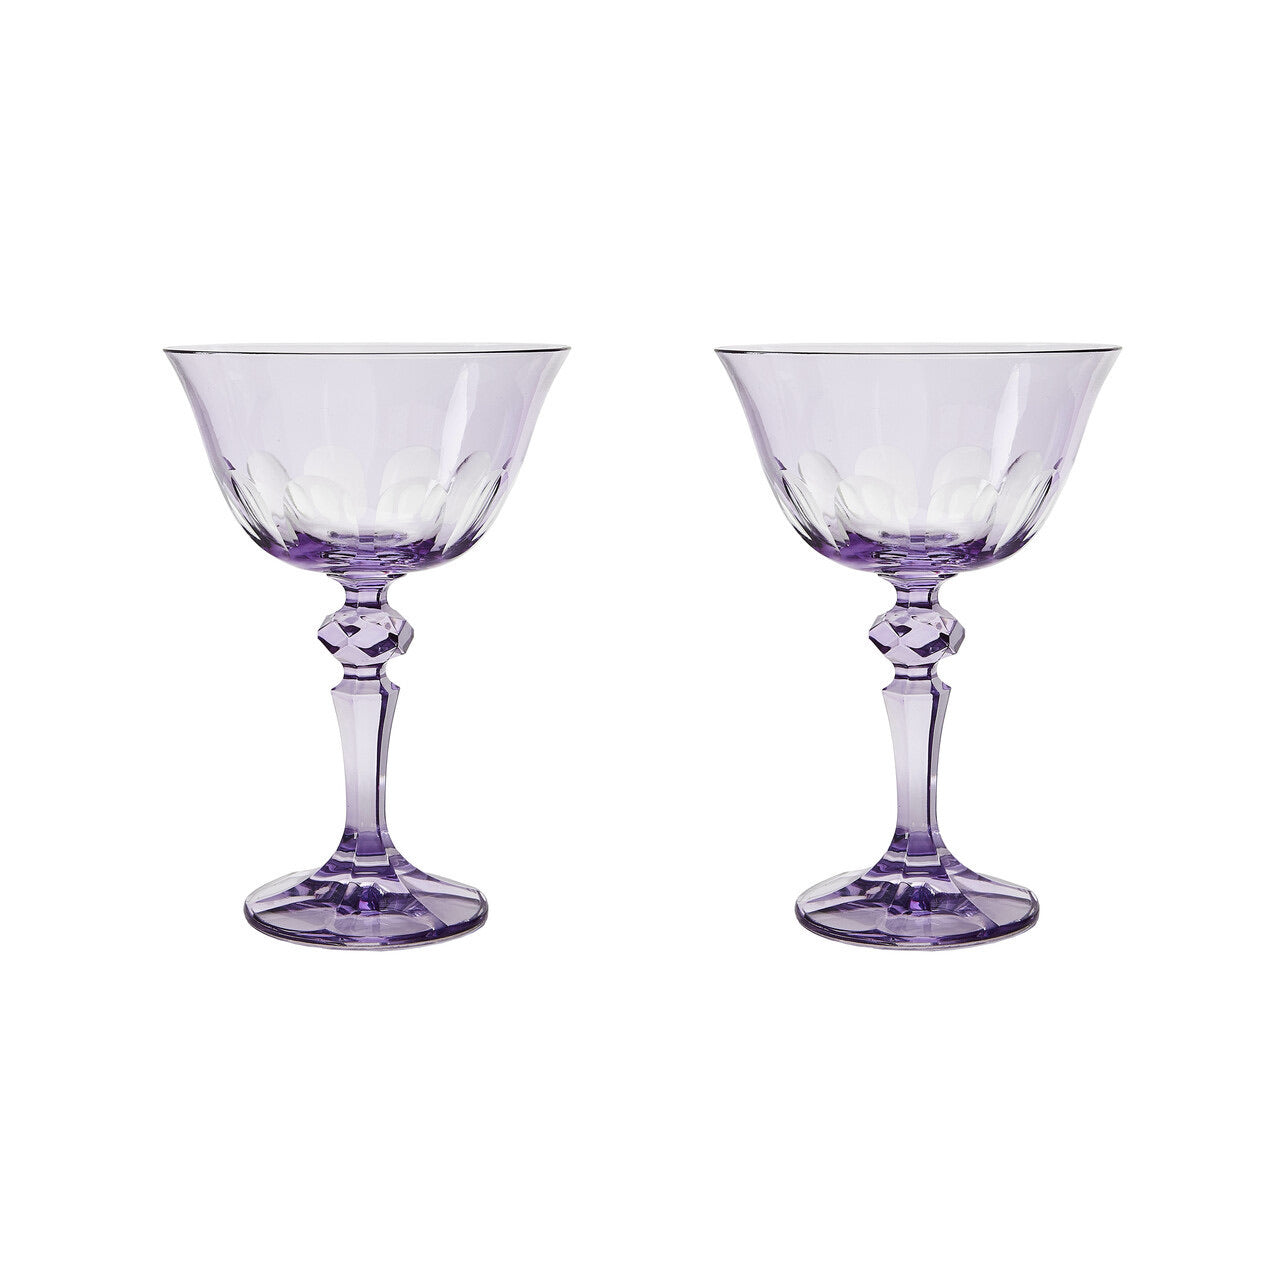 Rialto Coupe Glass in Amethyst